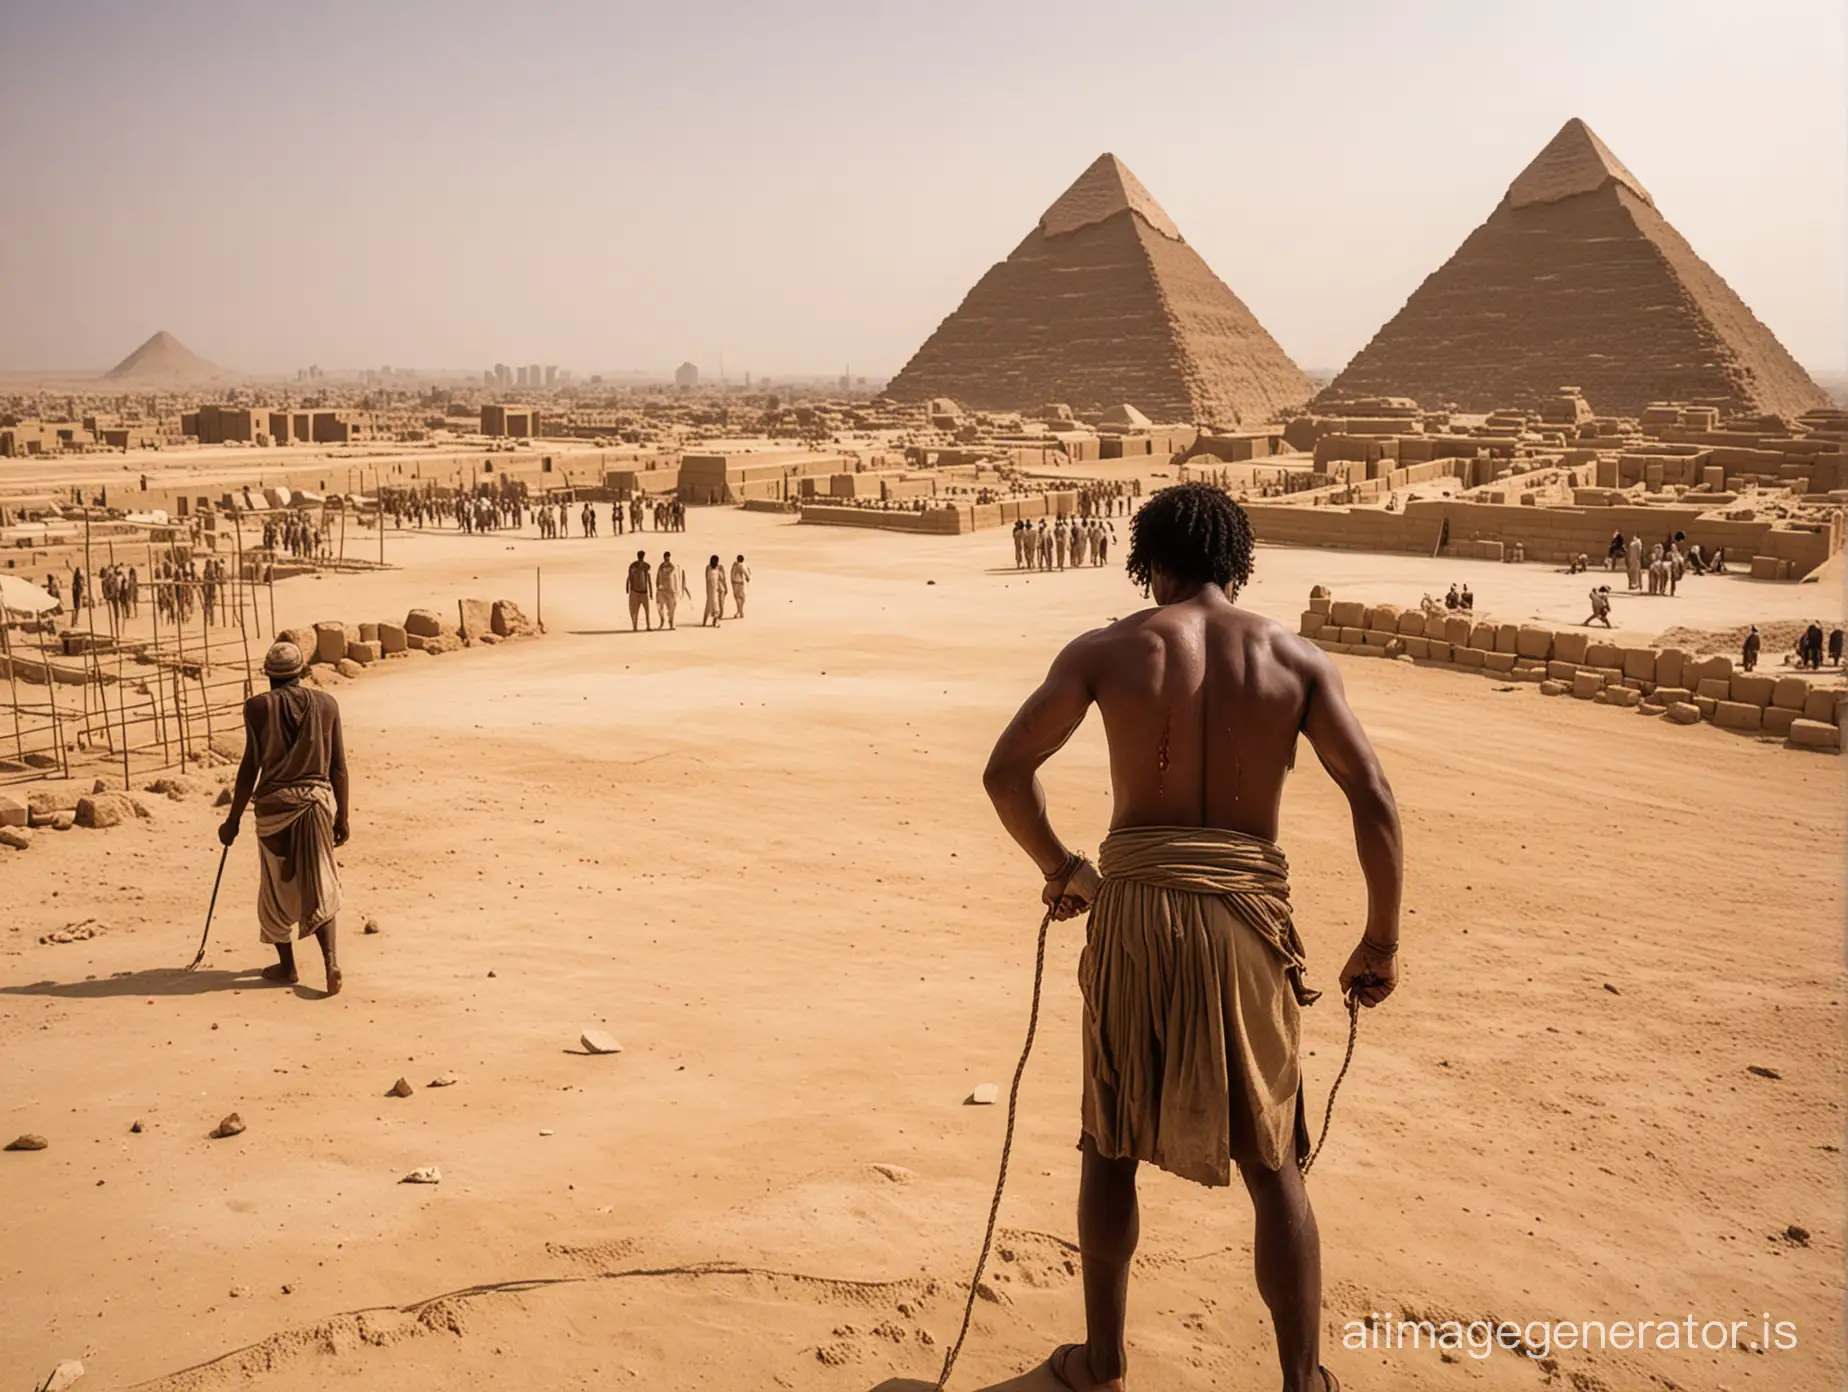 Jewish slave whipped in ancient Egypt. The slave is scrawny and poor. The whip causes bloody welts on his back. The blood is flowing. A pyramid construction site in the background.